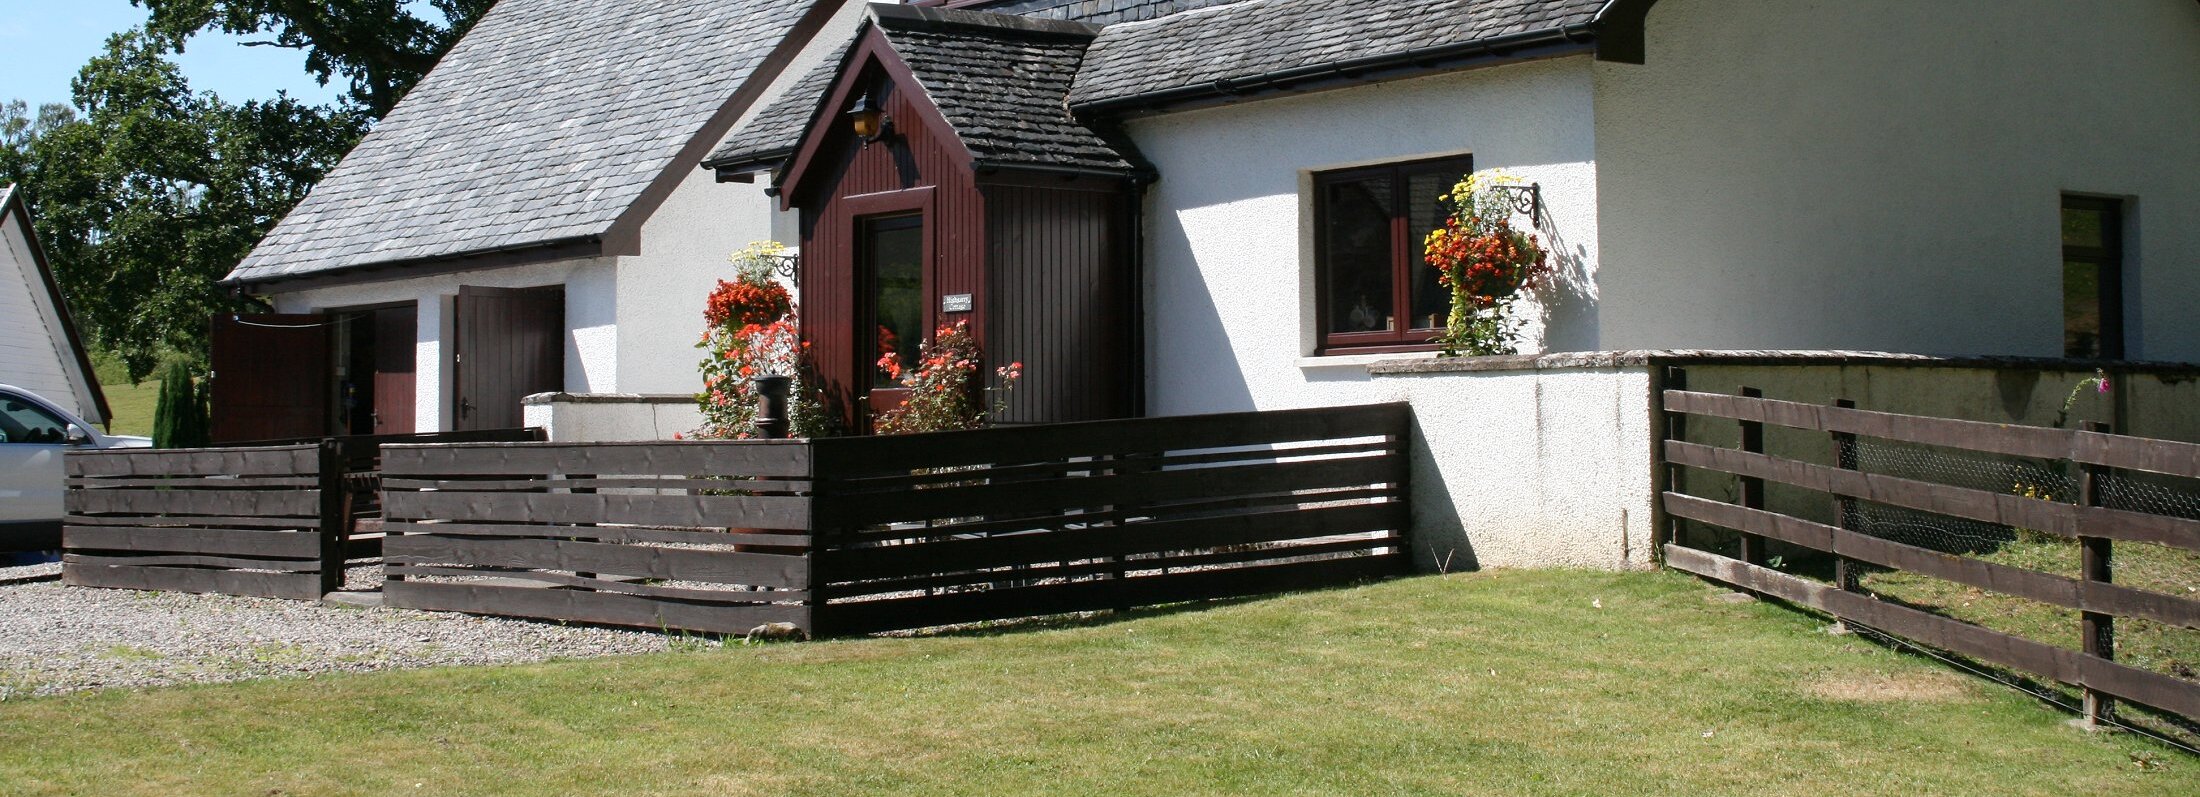 Highgarry Cottage self catering